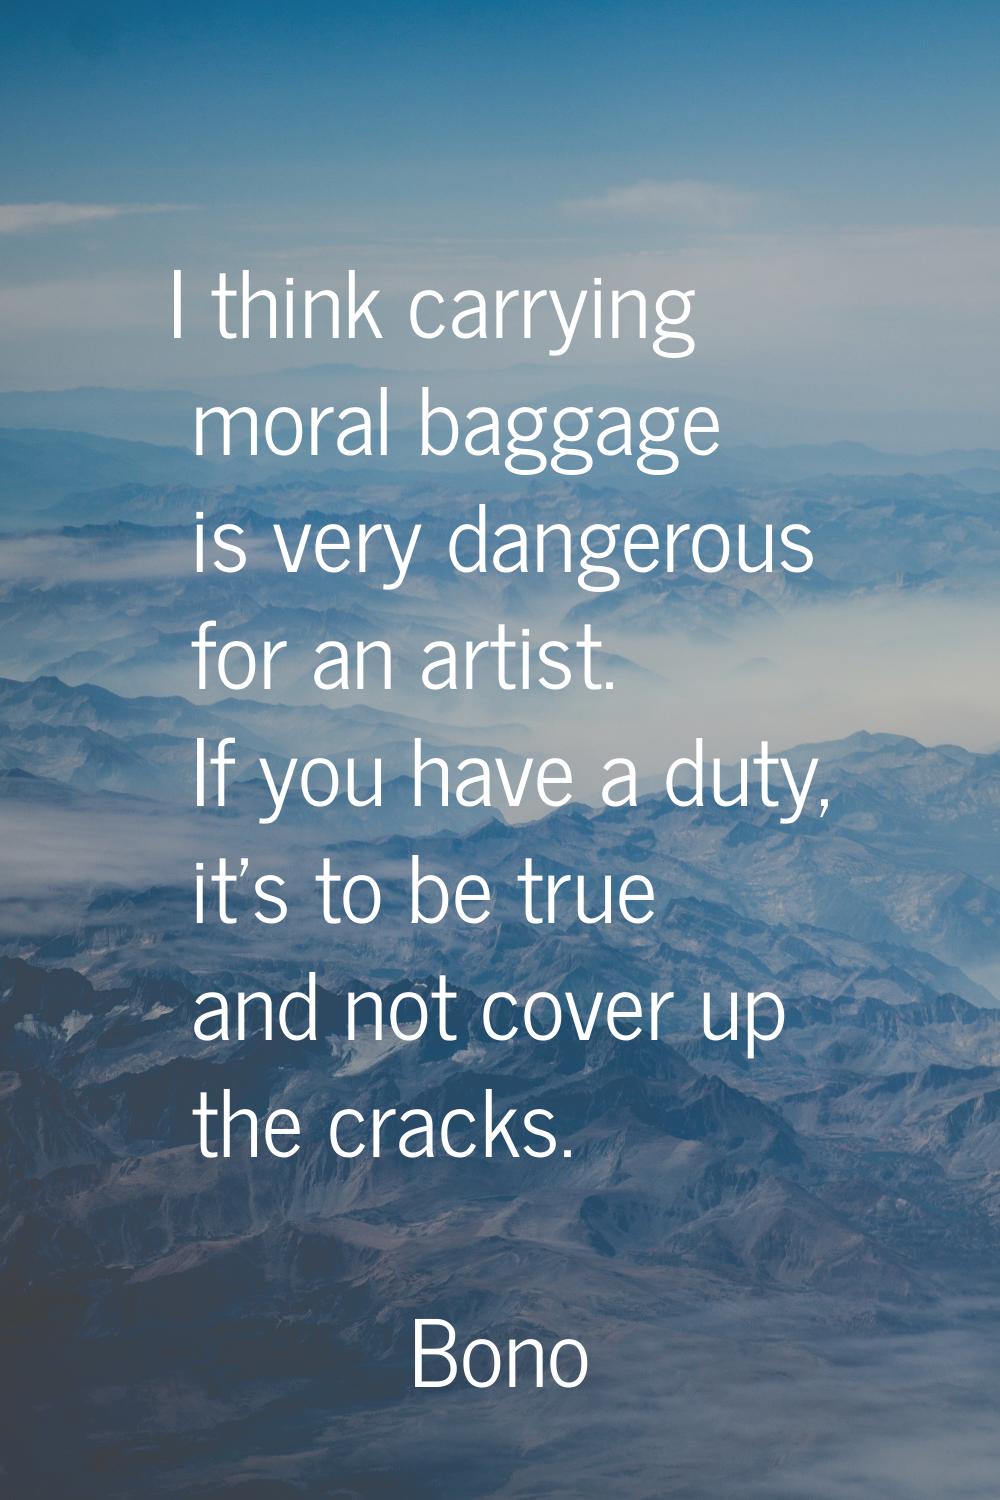 I think carrying moral baggage is very dangerous for an artist. If you have a duty, it's to be true